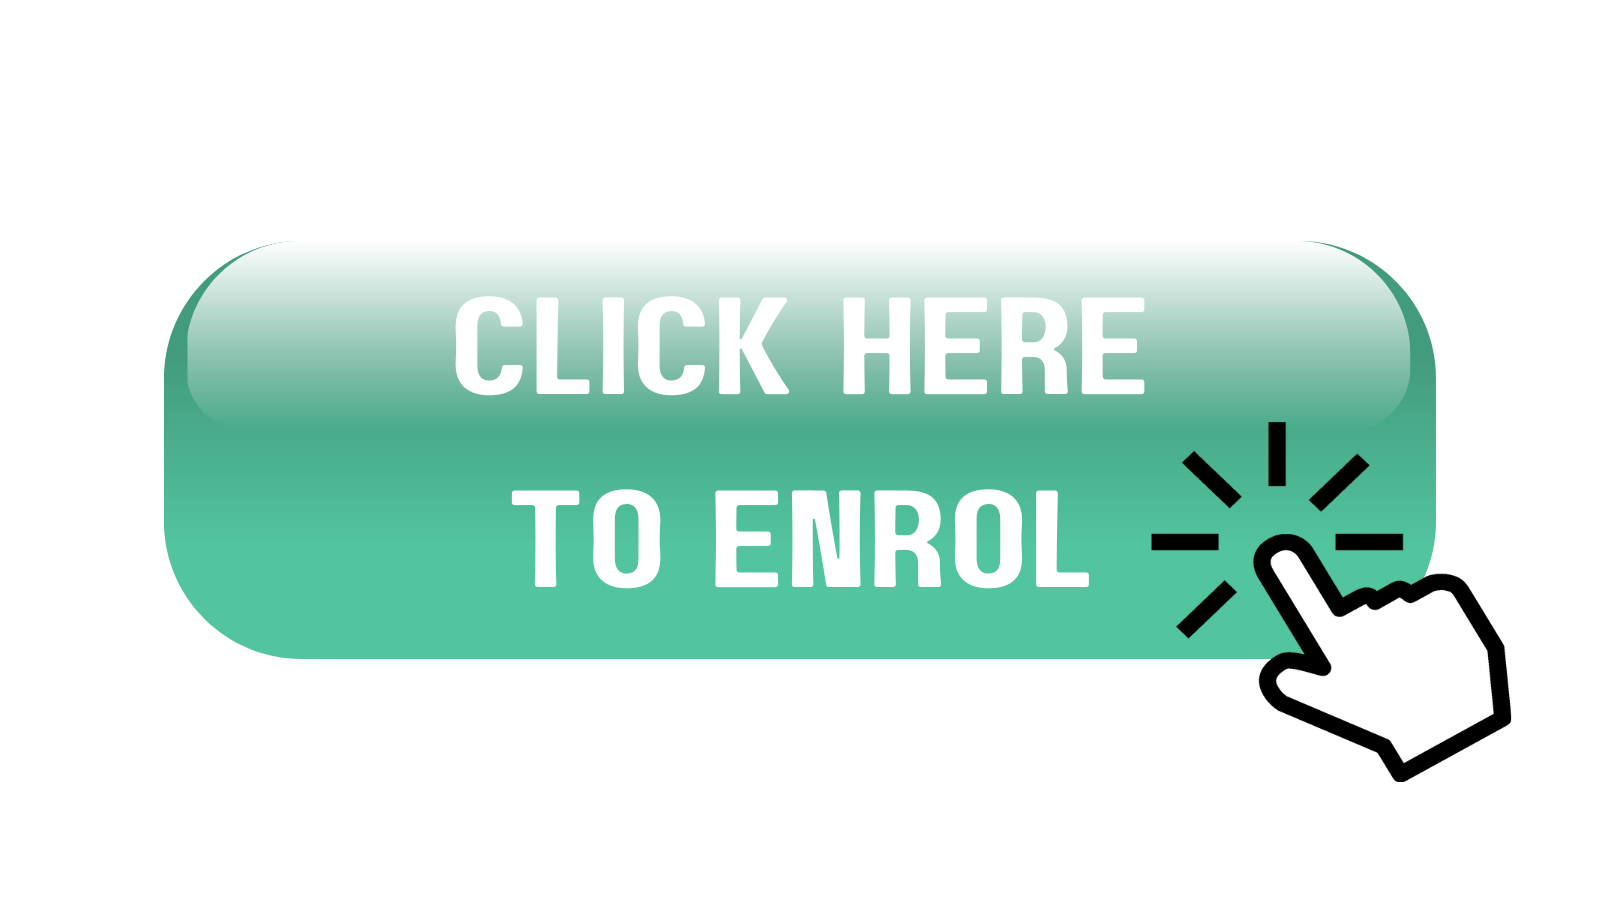 Click here to enrol